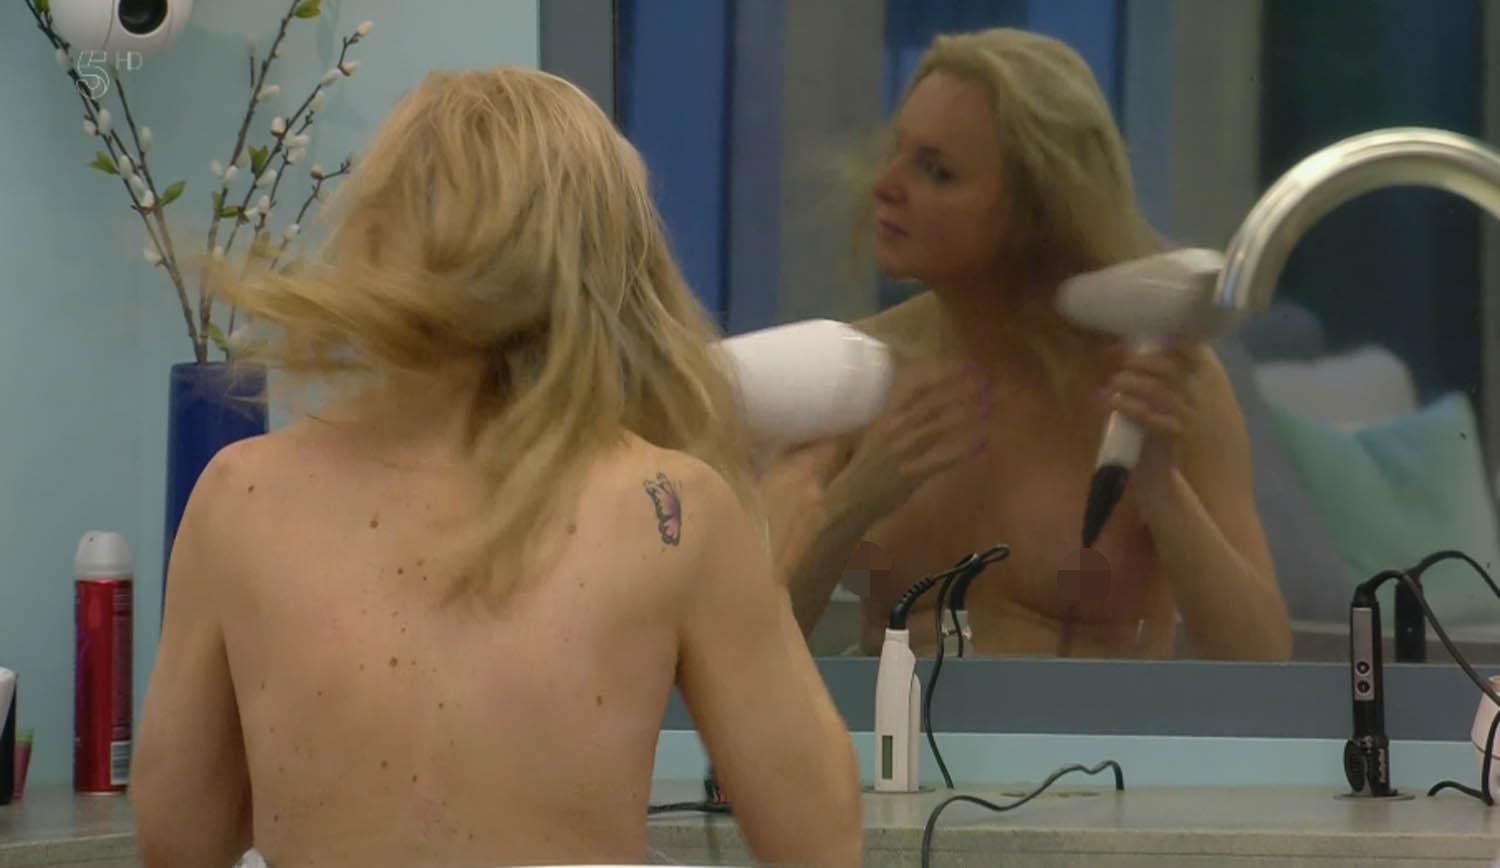 darren tungate recommends big brother girls topless pic